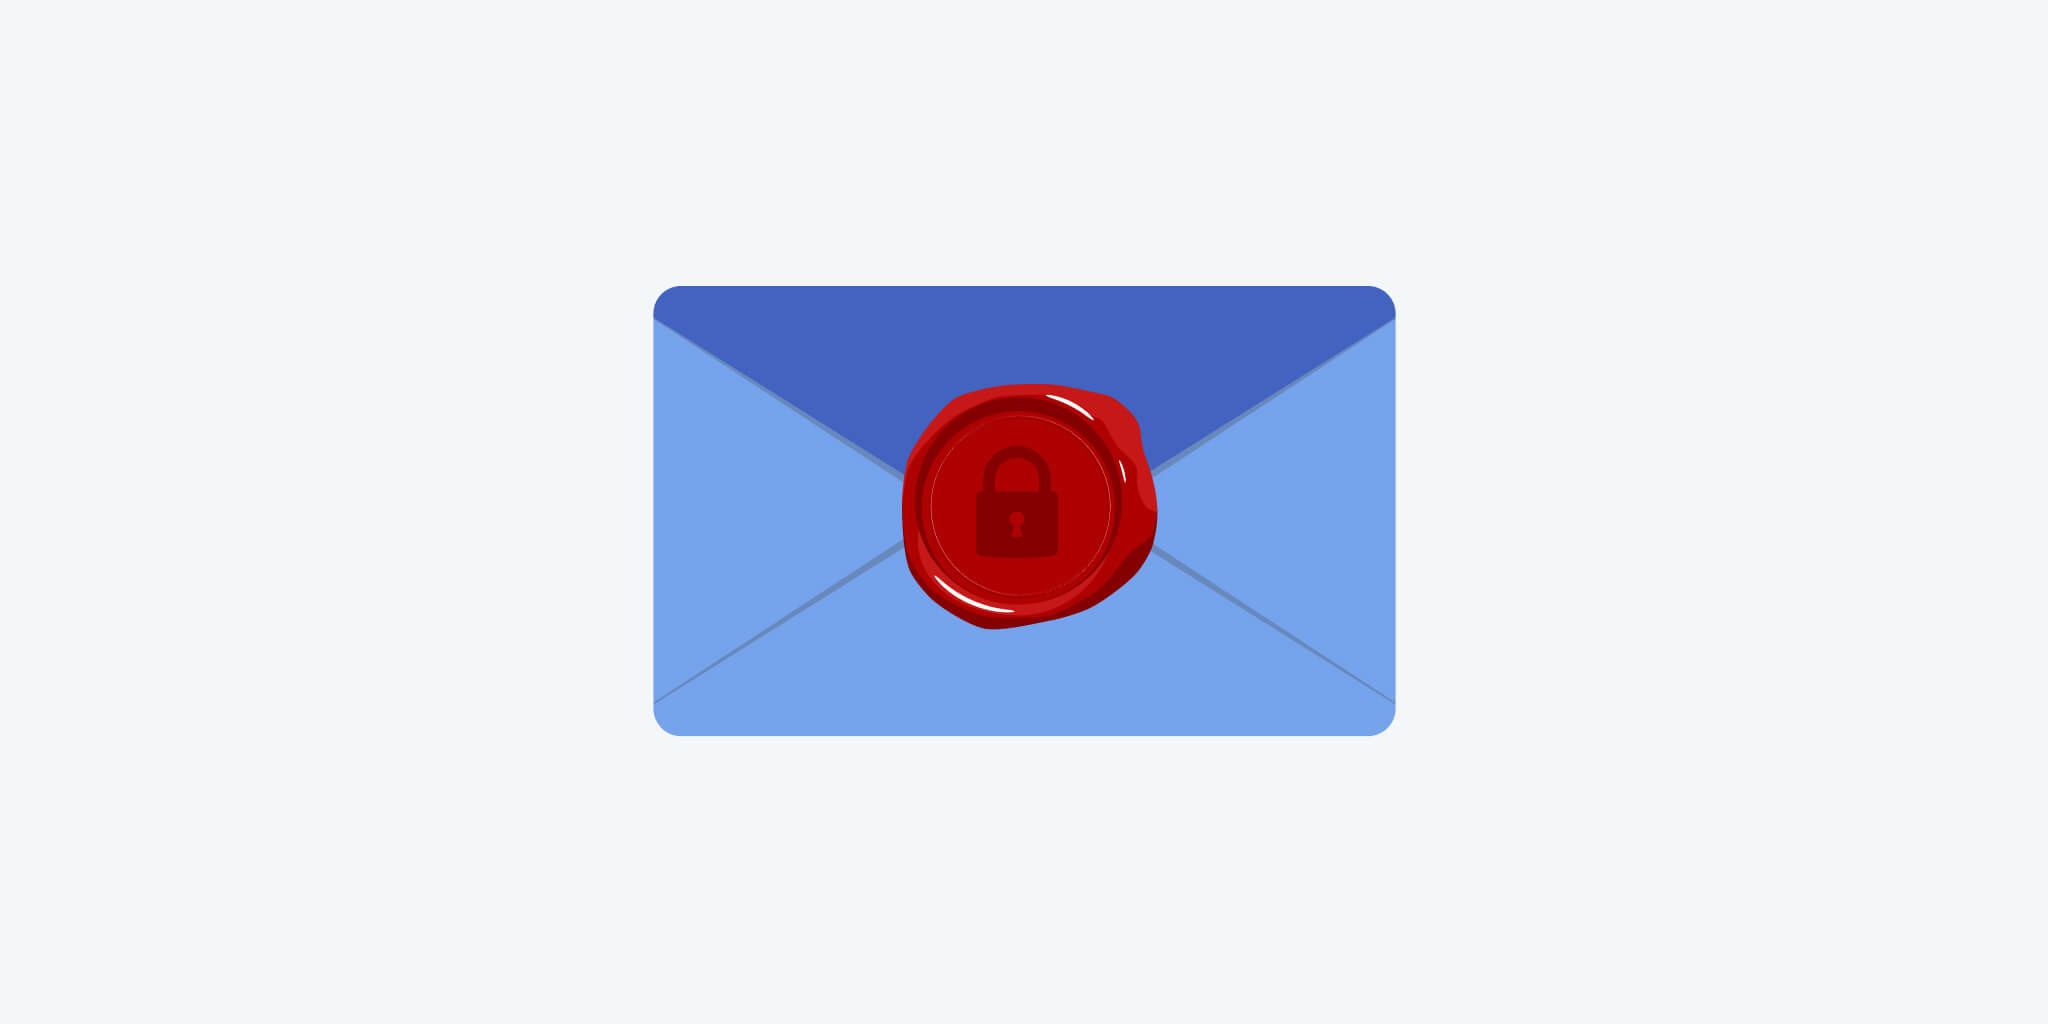 A mail envelope freshly stamped with a wax seal in the shape of a lock icon